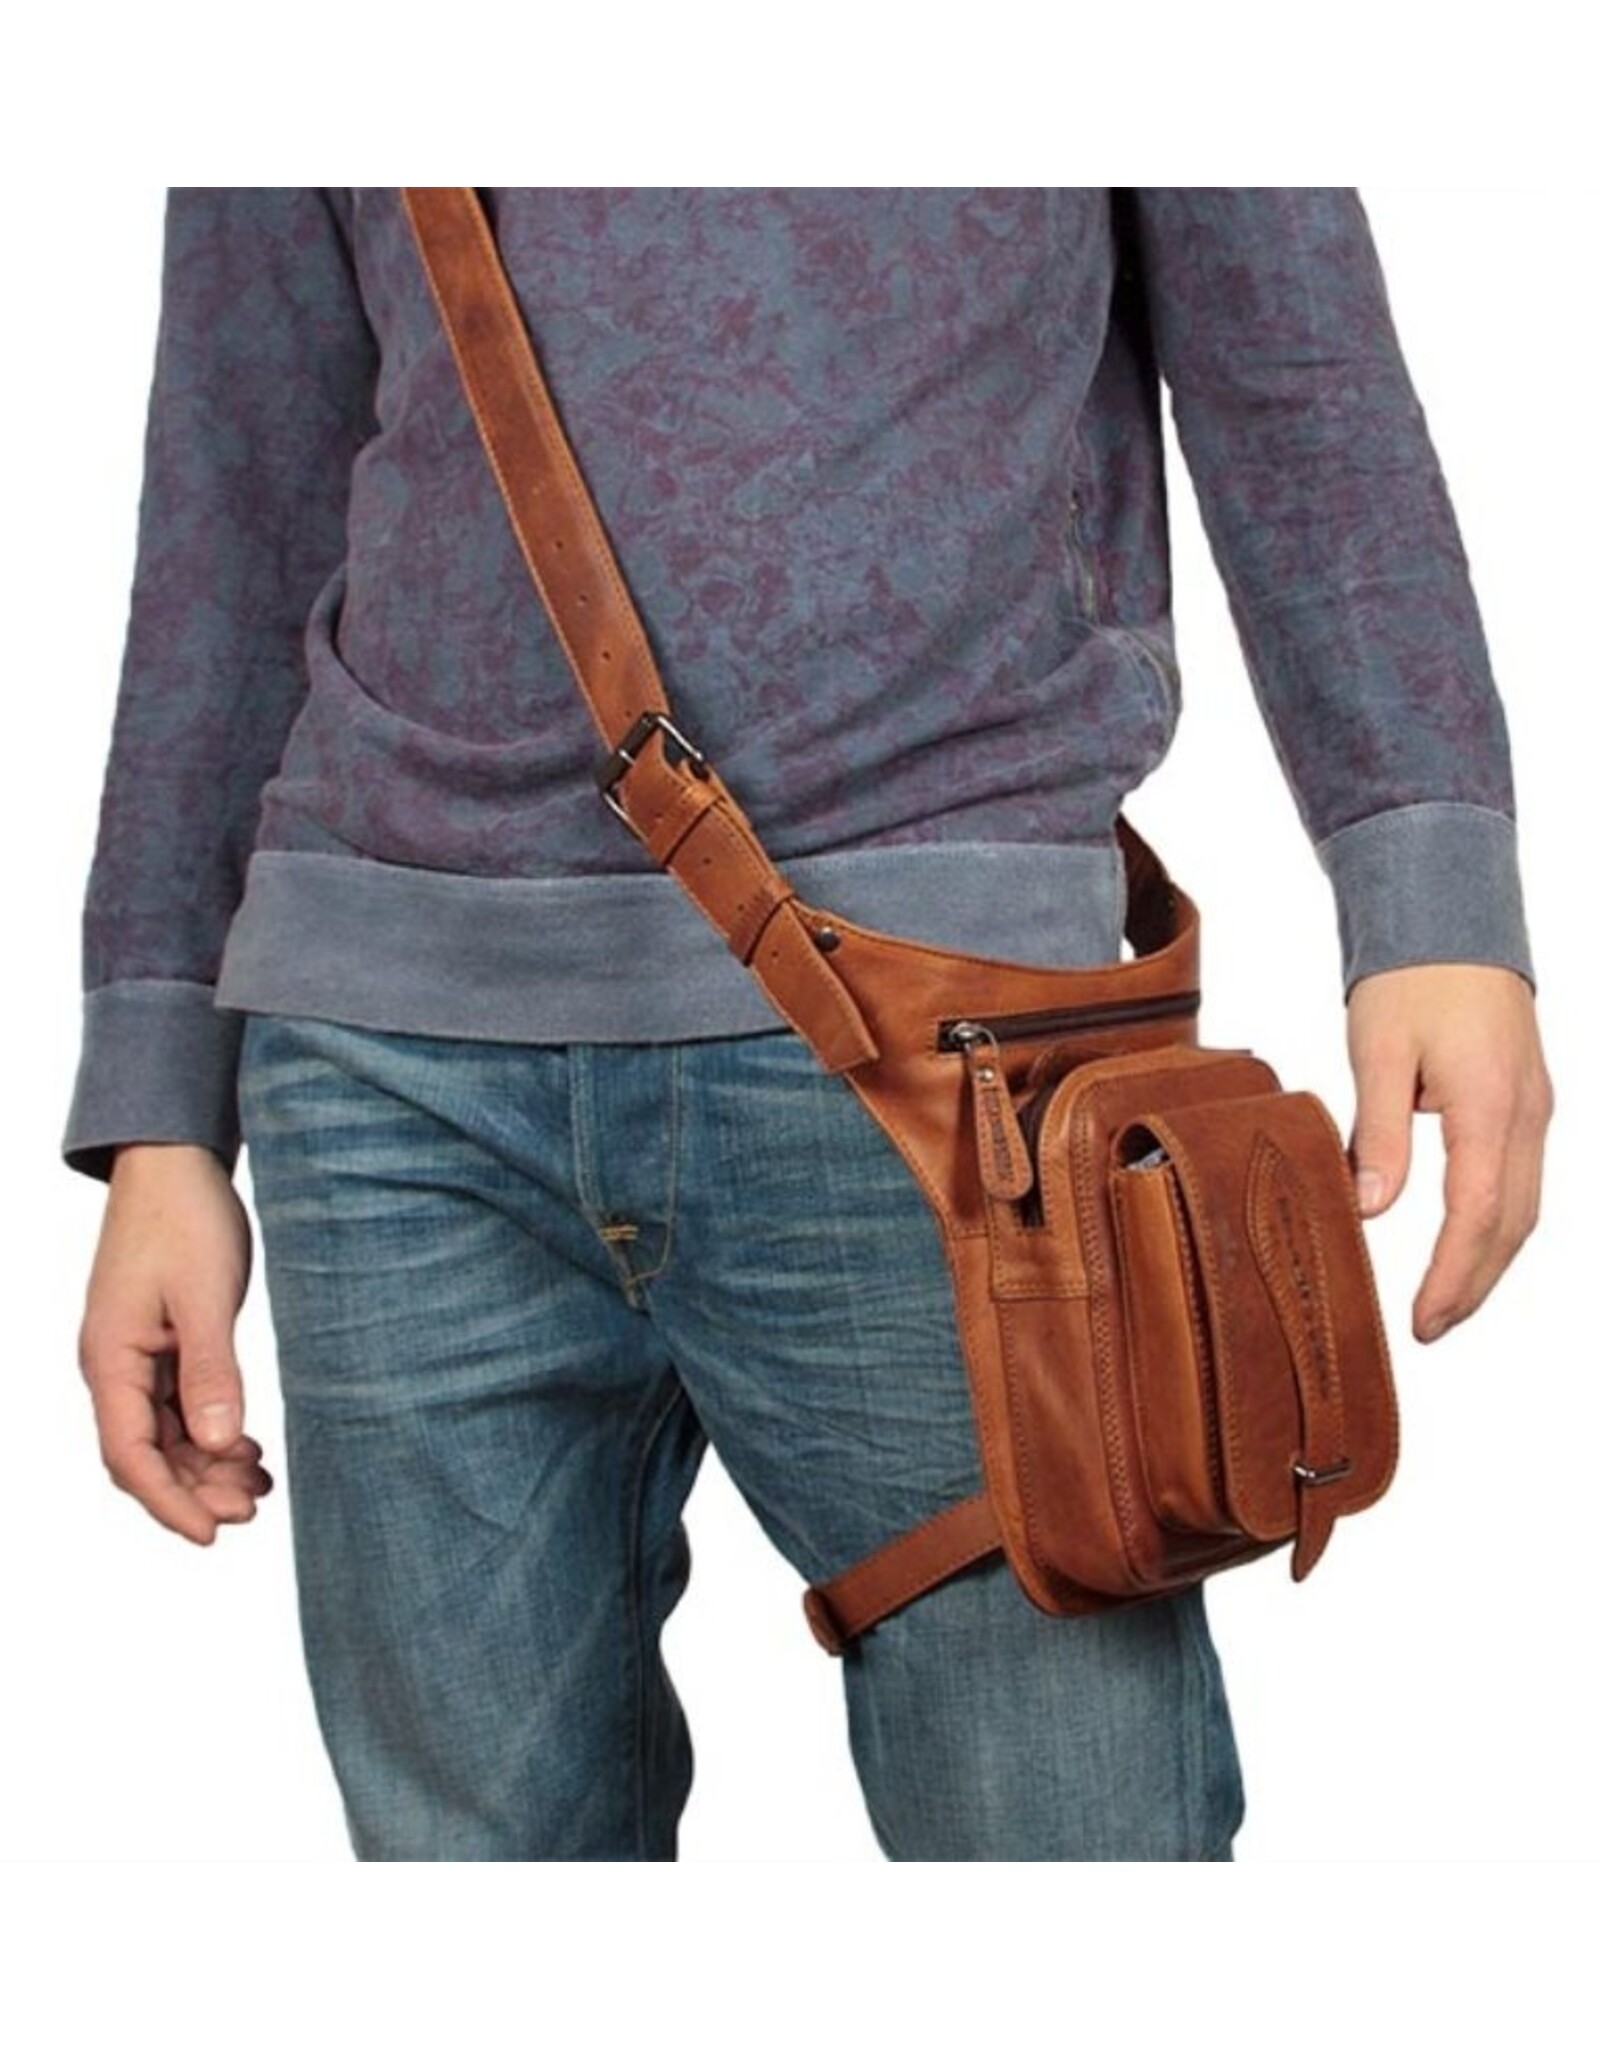 HillBurry Leather Shoulder bags  leather crossbody bags - HillBurry Crossbody bag Hunter leather